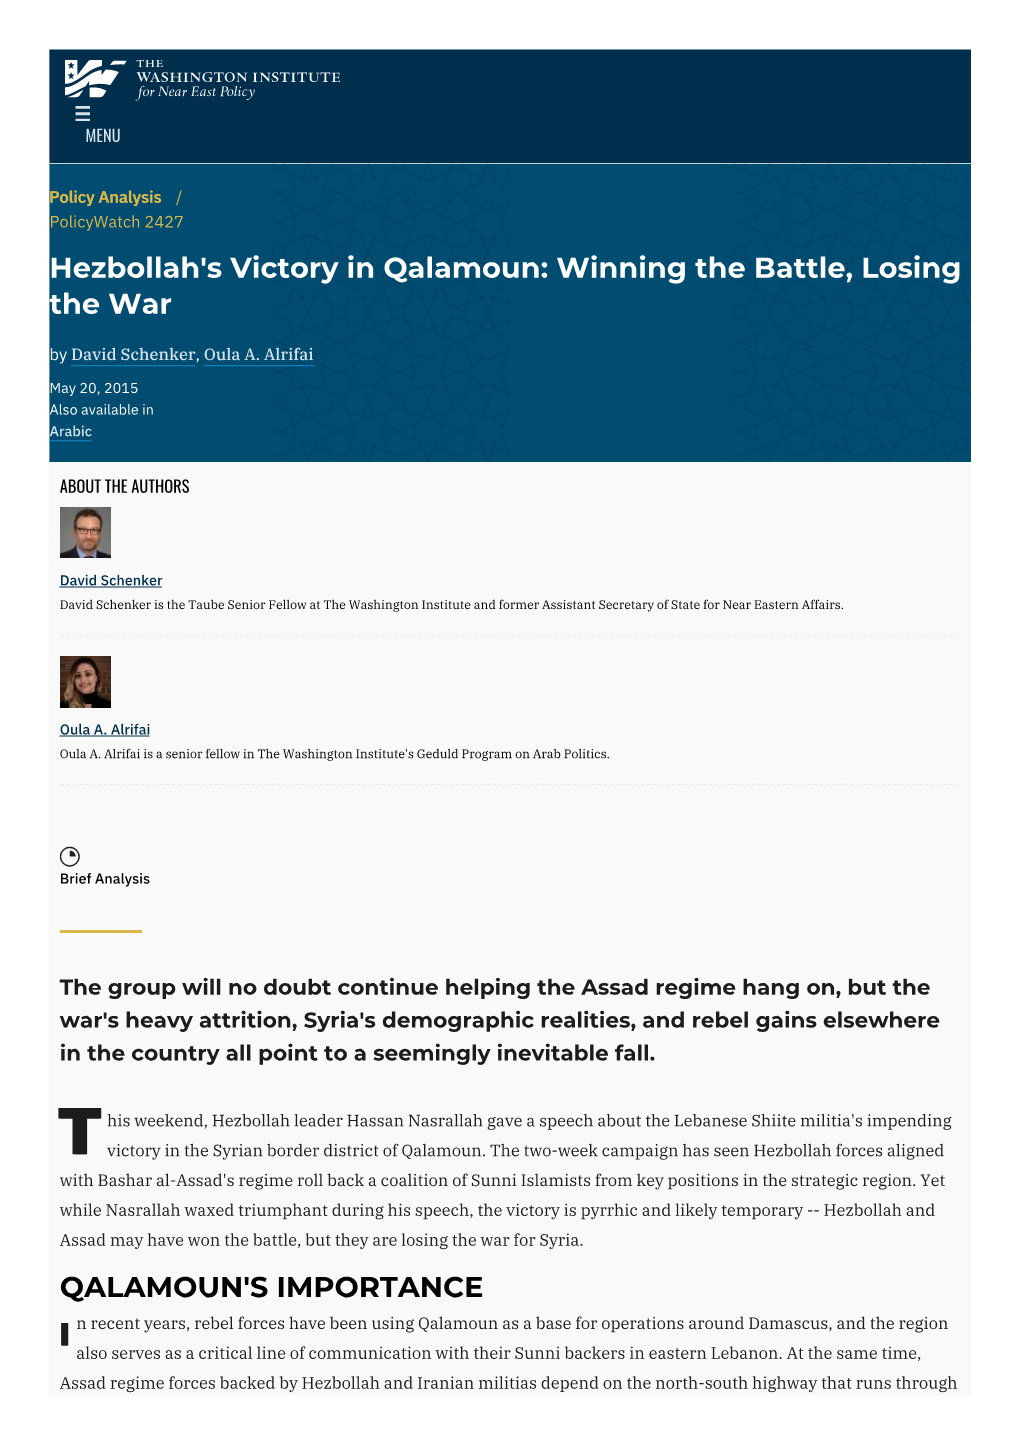 Hezbollah's Victory in Qalamoun: Winning the Battle, Losing the War by David Schenker, Oula A